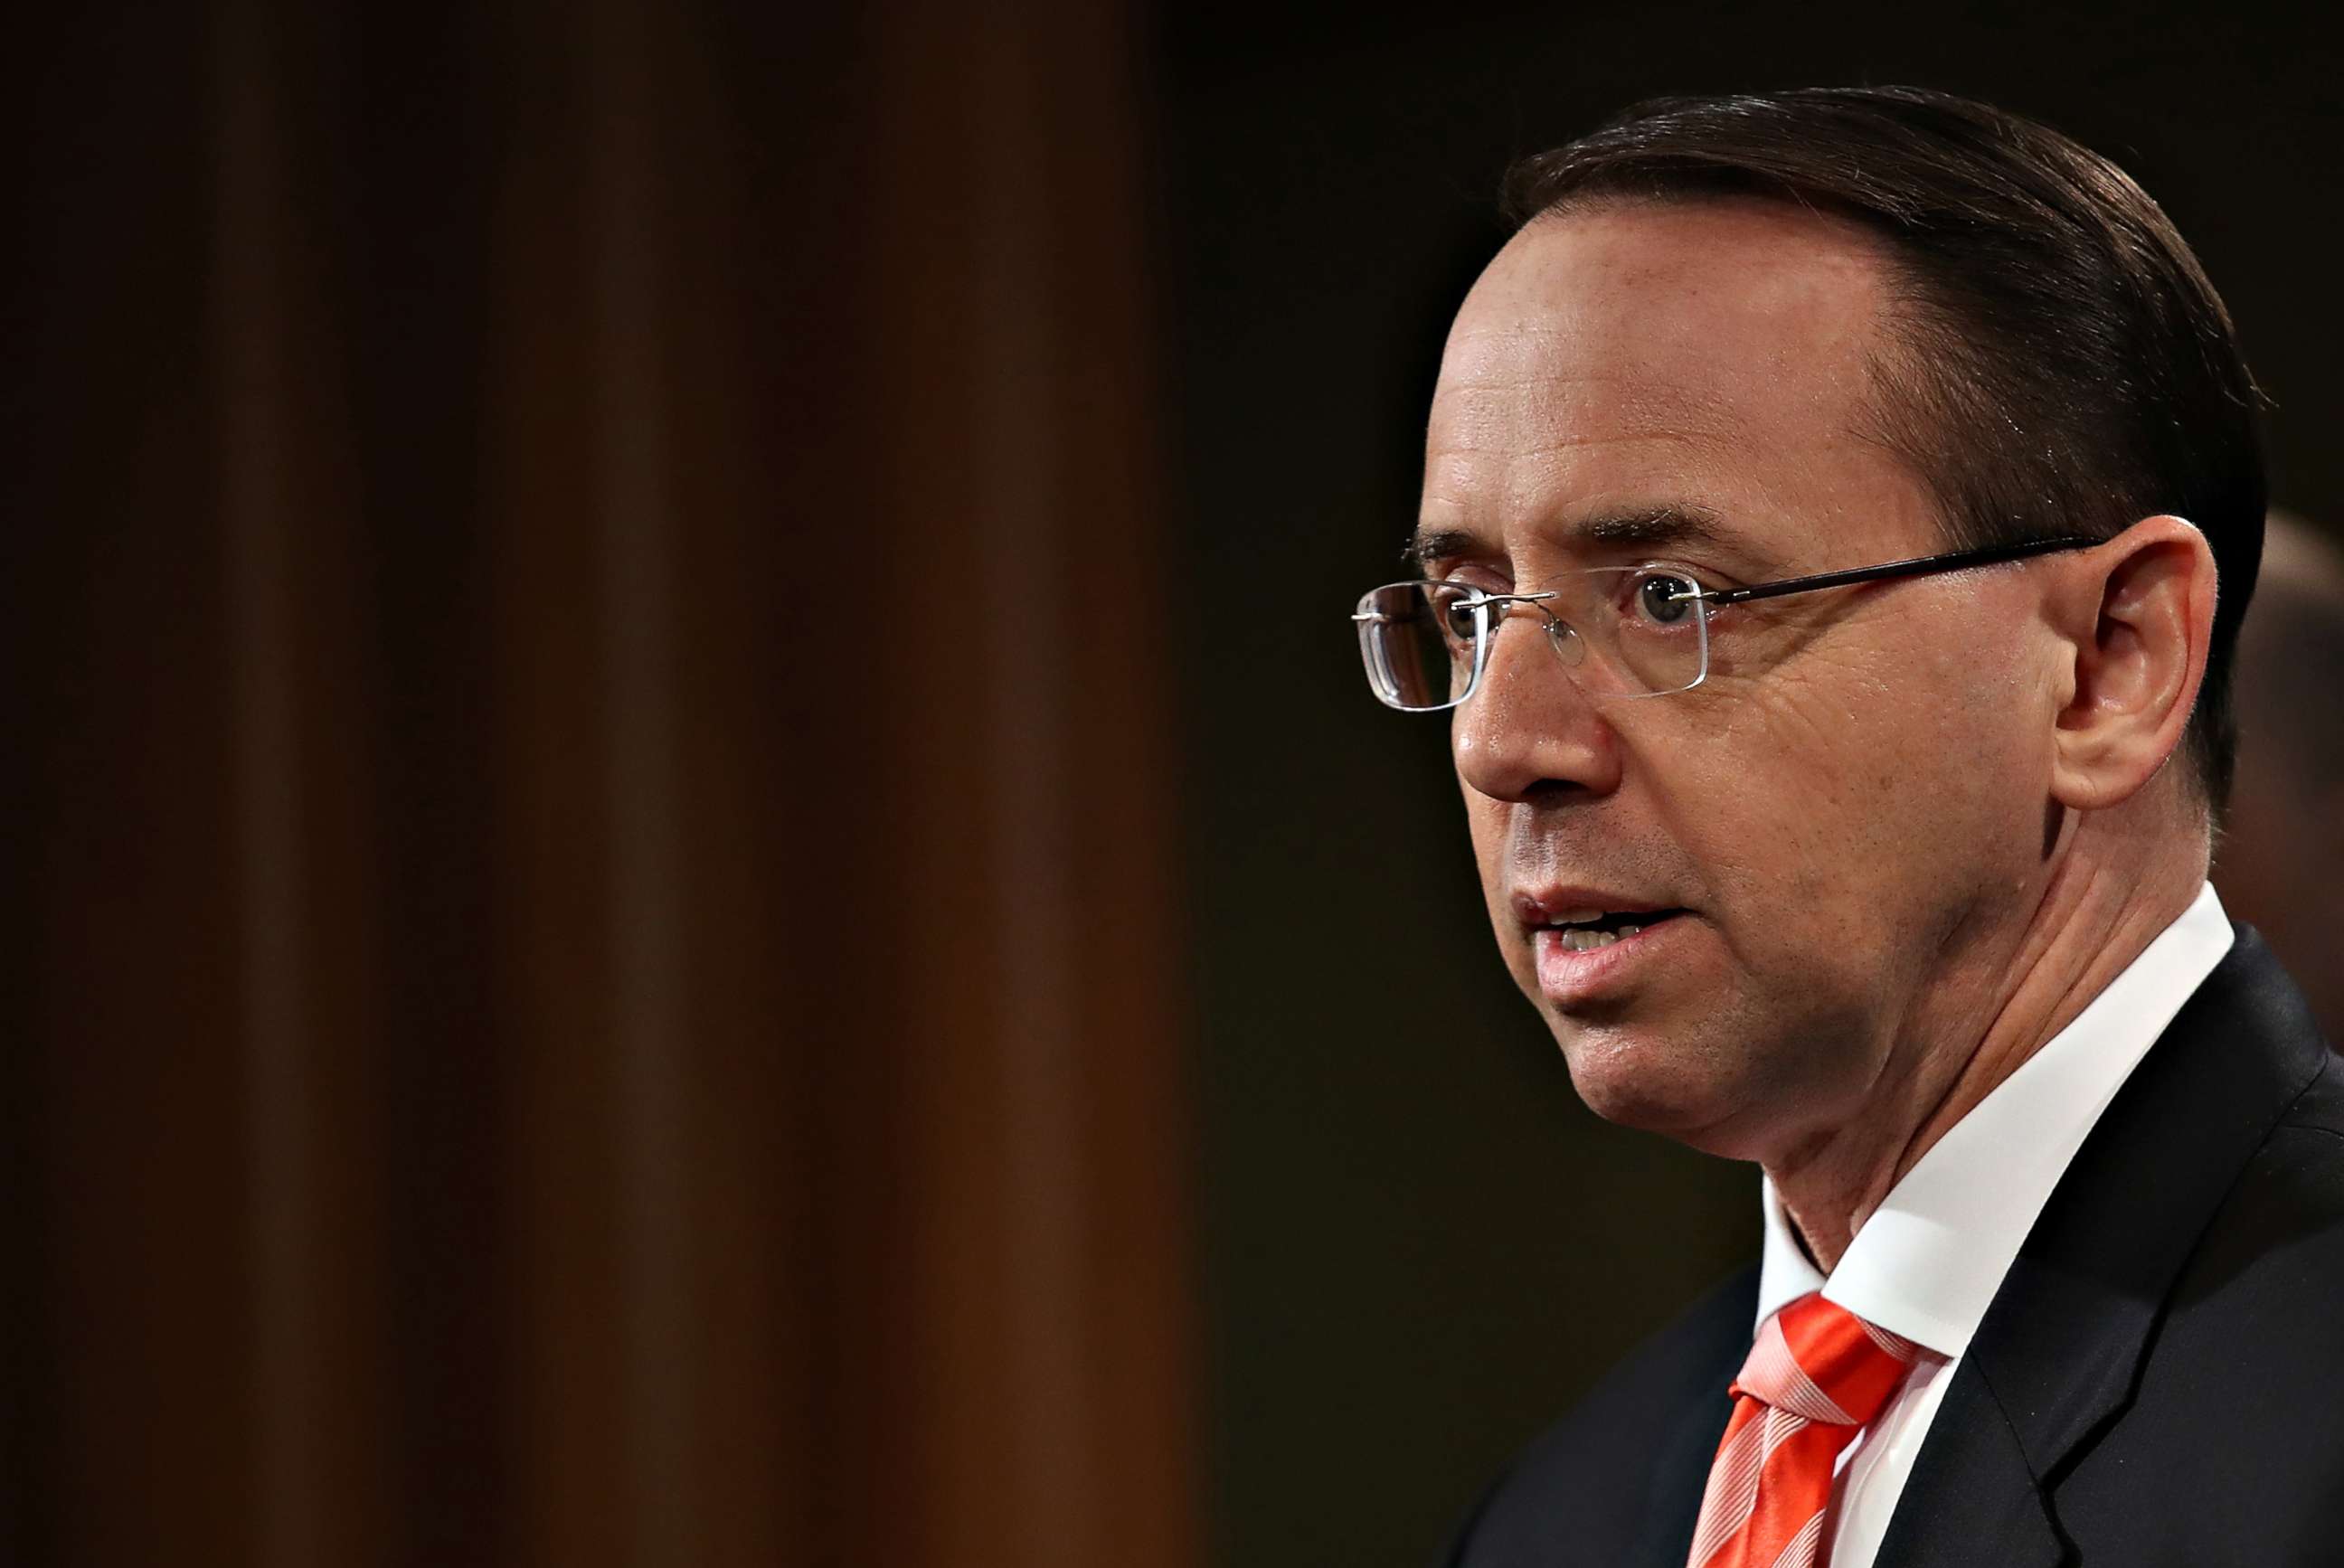 PHOTO: Deputy Attorney General Rod Rosenstein speaks at a press conference at the Department of Justice on March 23, 2018 in Washington, DC.